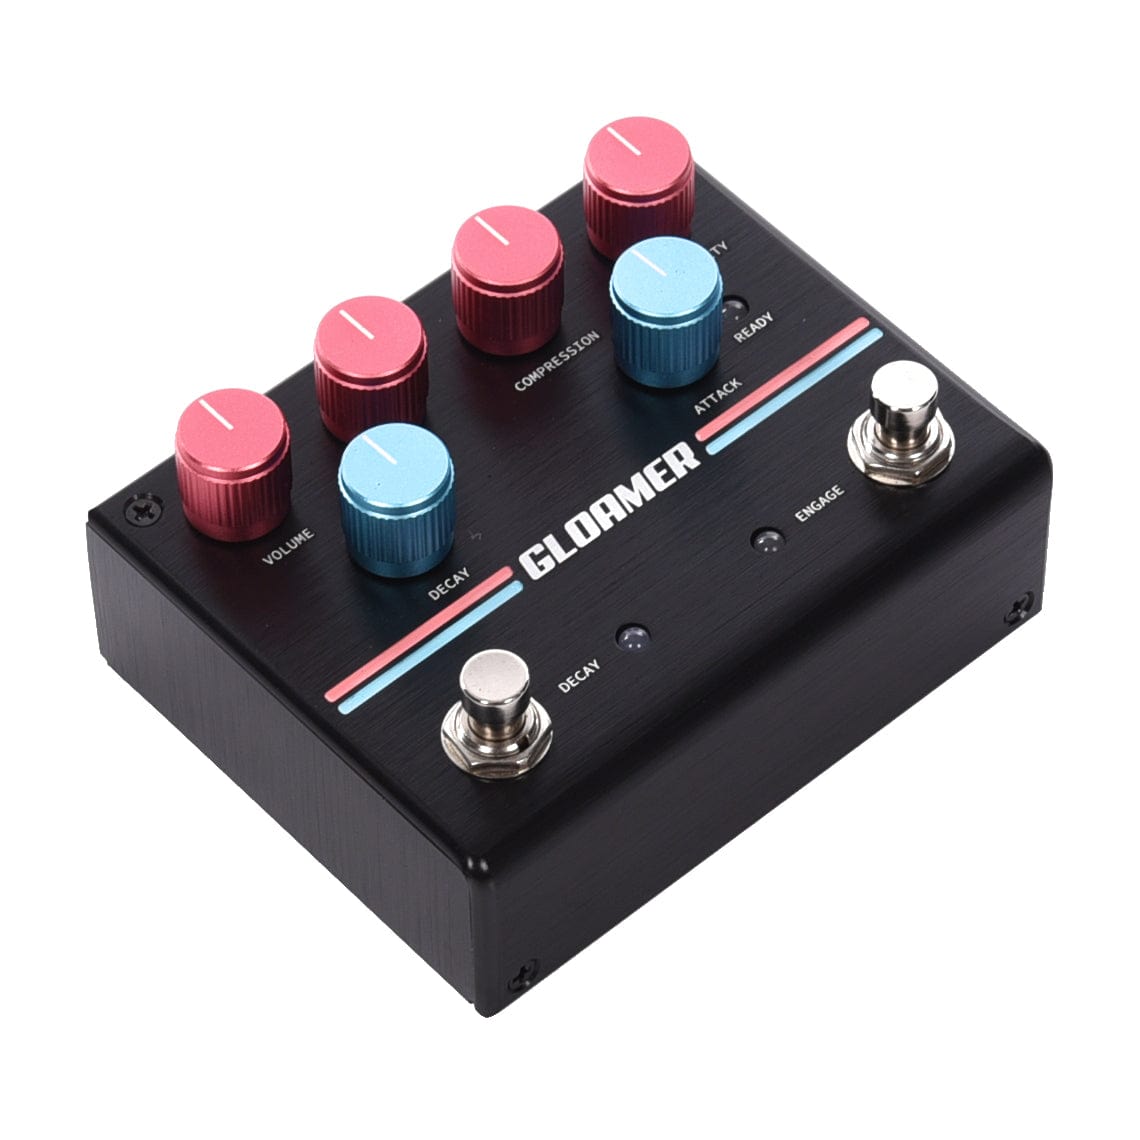 Pigtronix Gloamer Volume Swell & Compression Pedal Effects and Pedals / Chorus and Vibrato